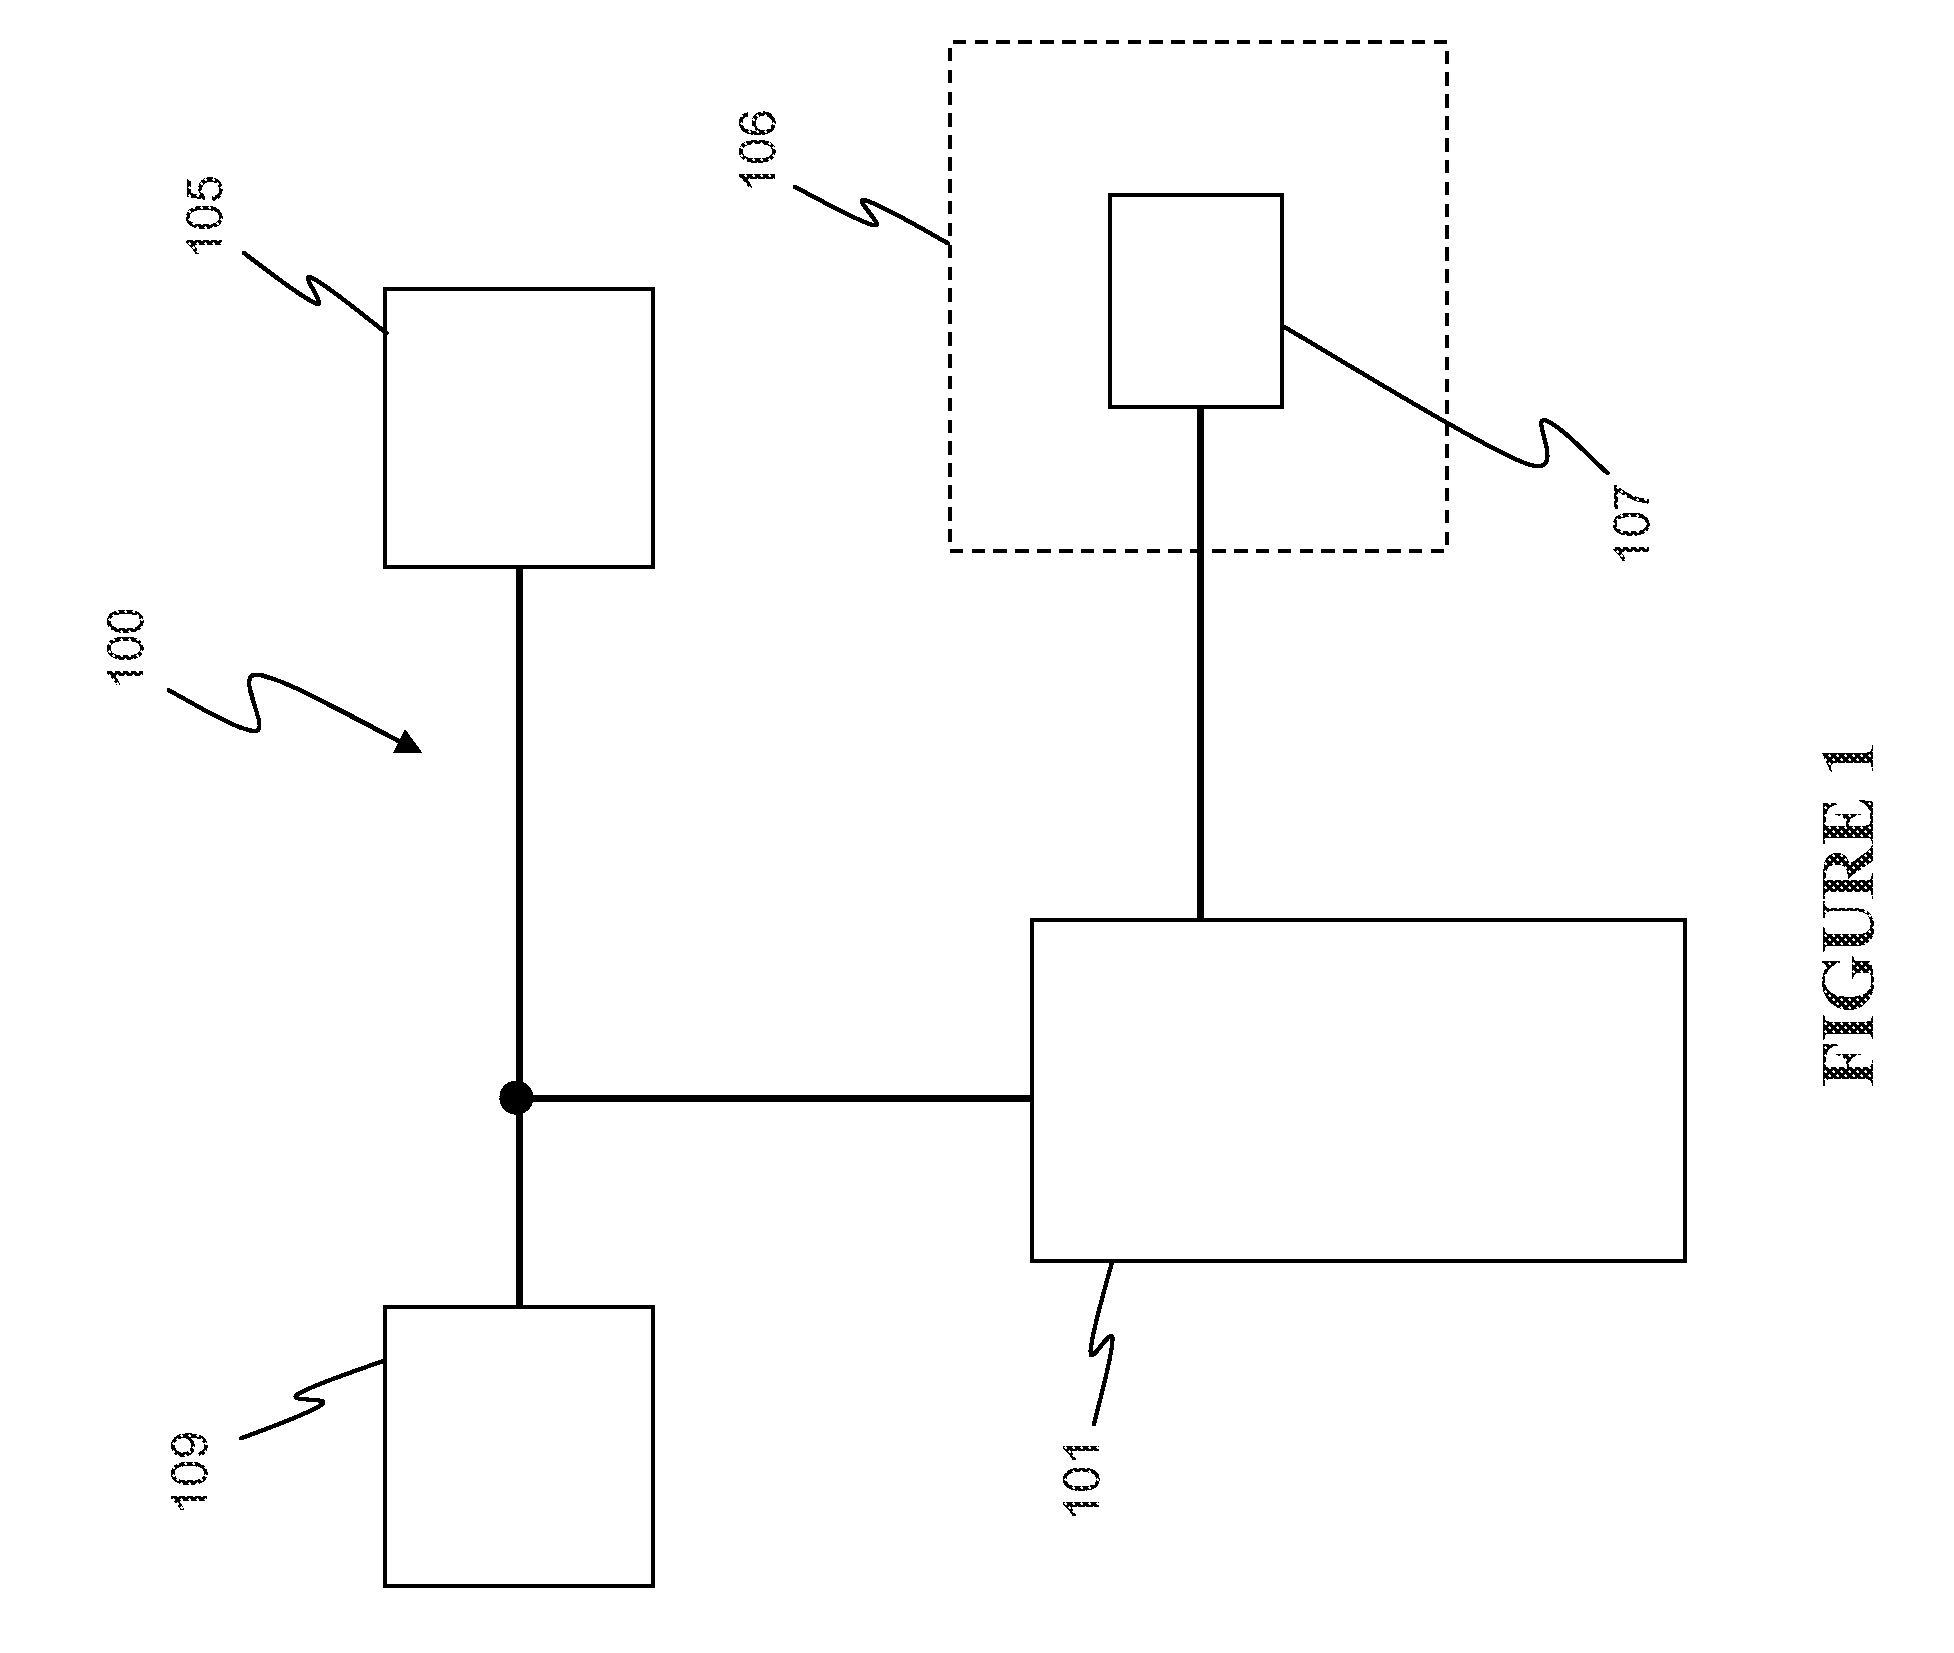 Methods and apparatus for hazard control and signaling